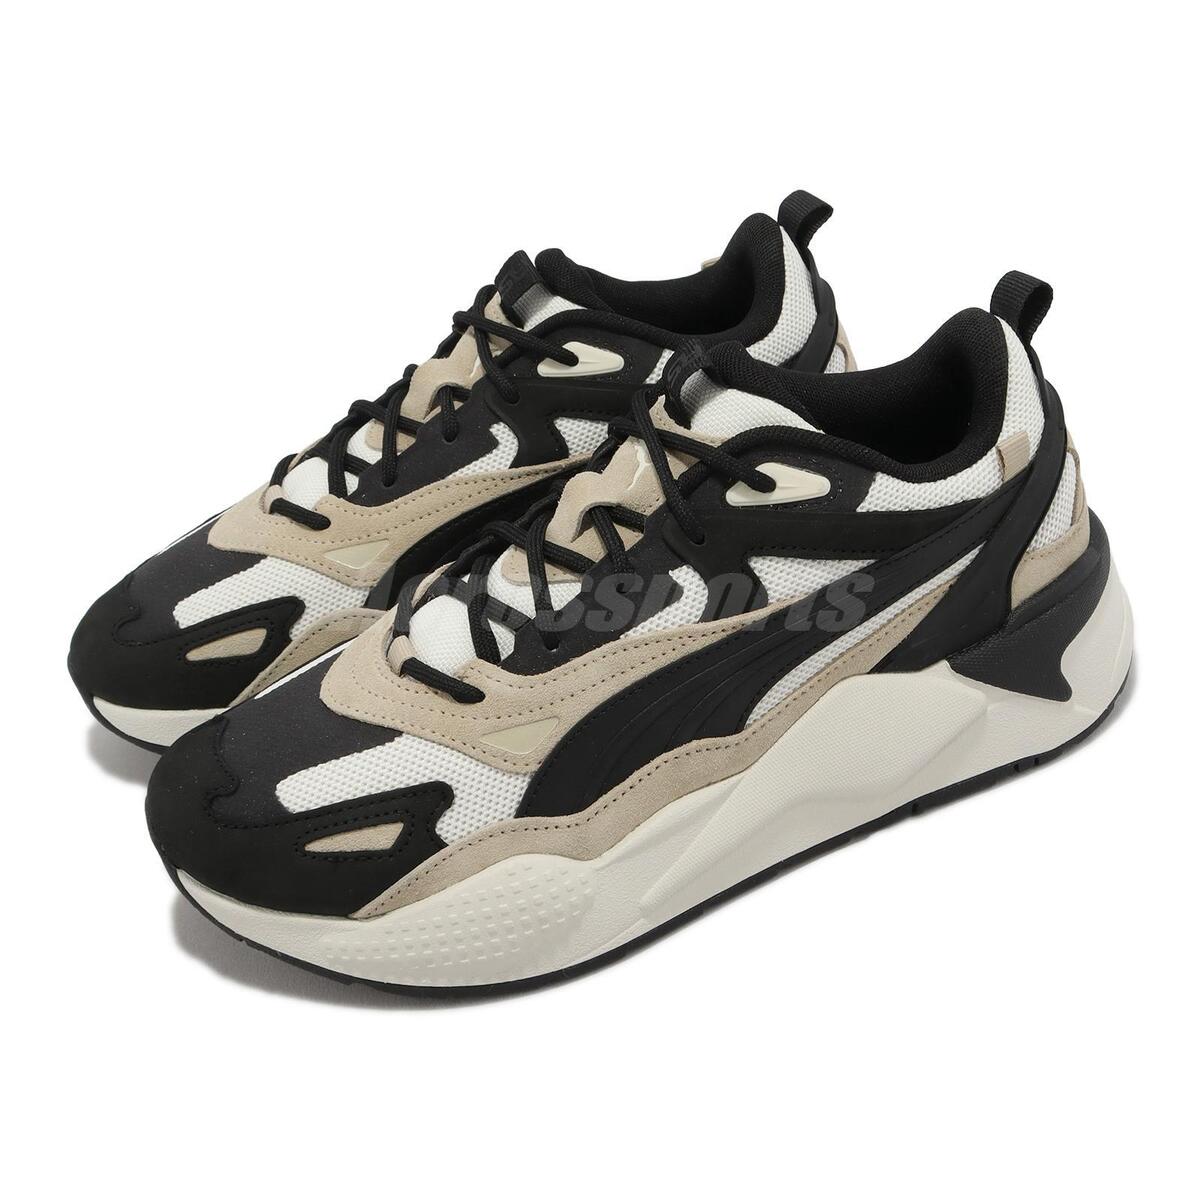 Tenis Puma X-Cell Action Hombre Negro Cafe